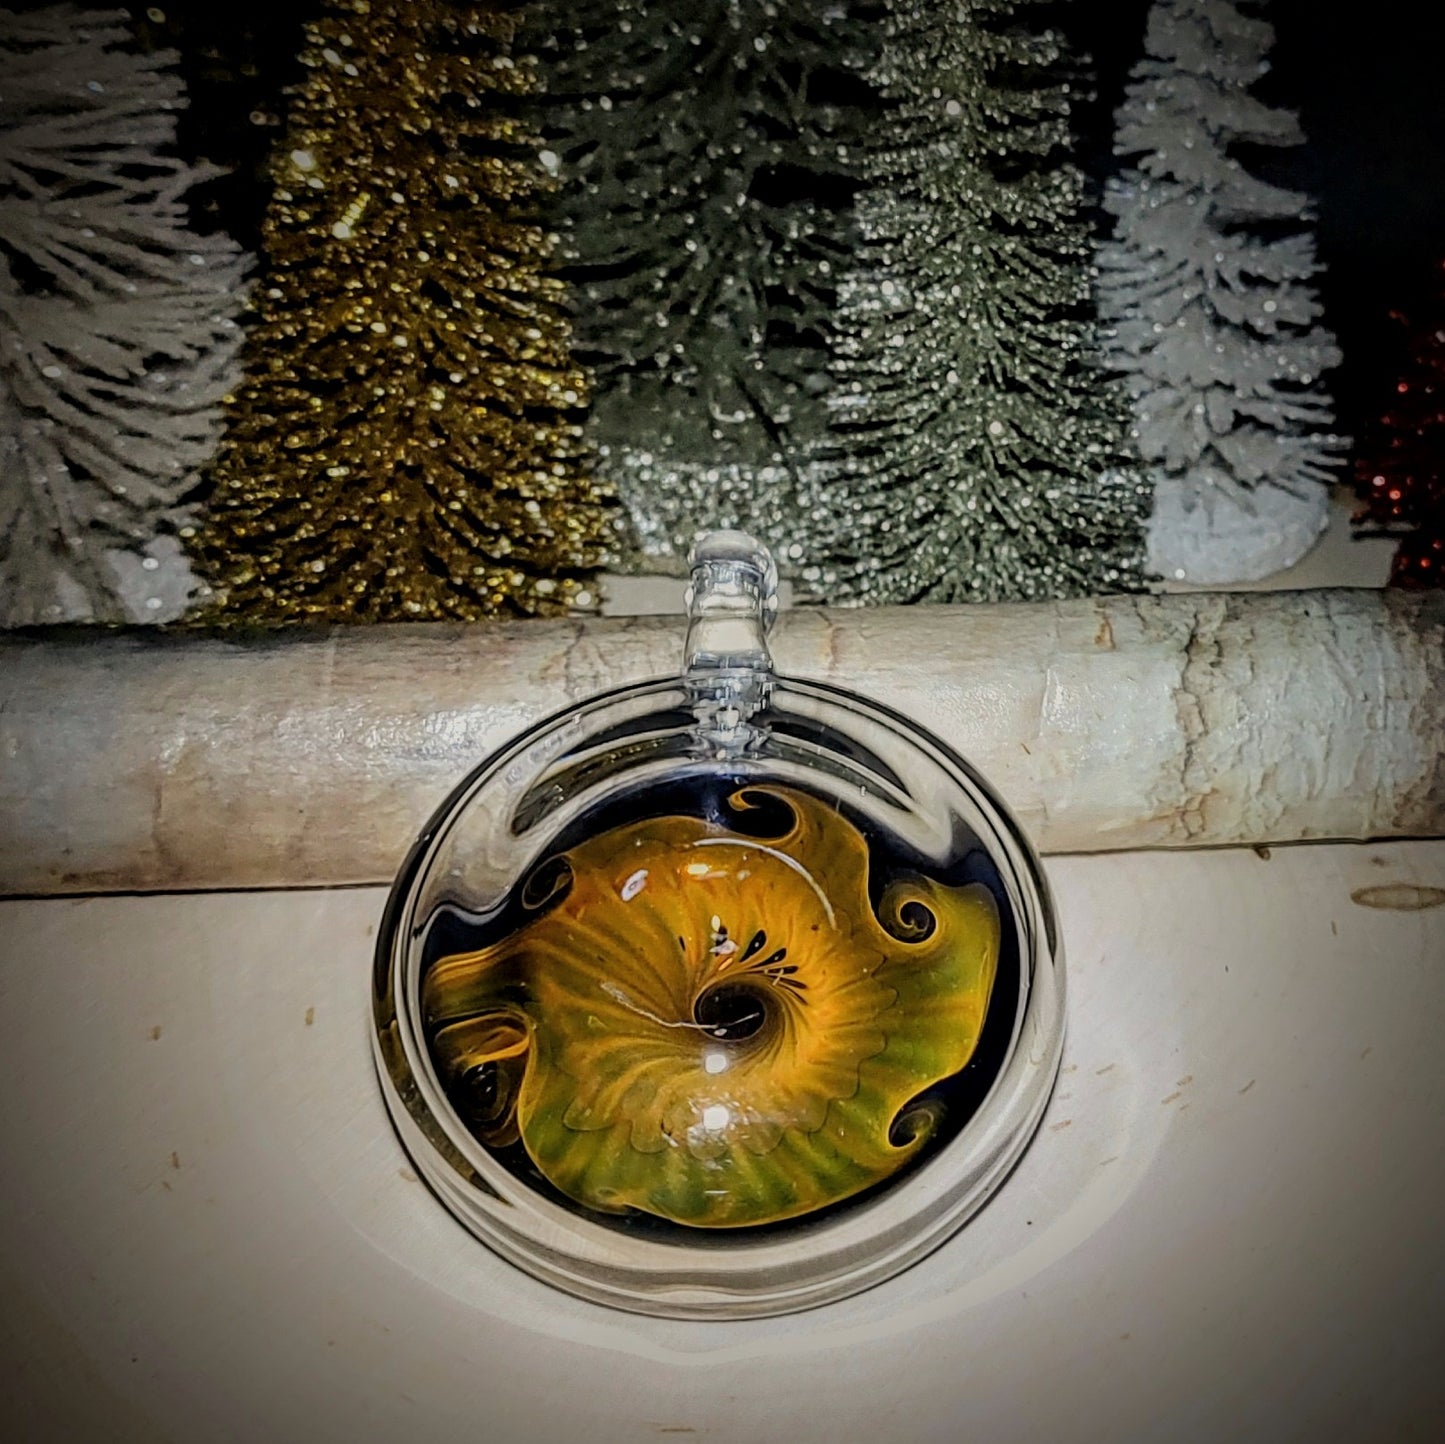 Christmas Fumed Ornament (Ready To Ship)